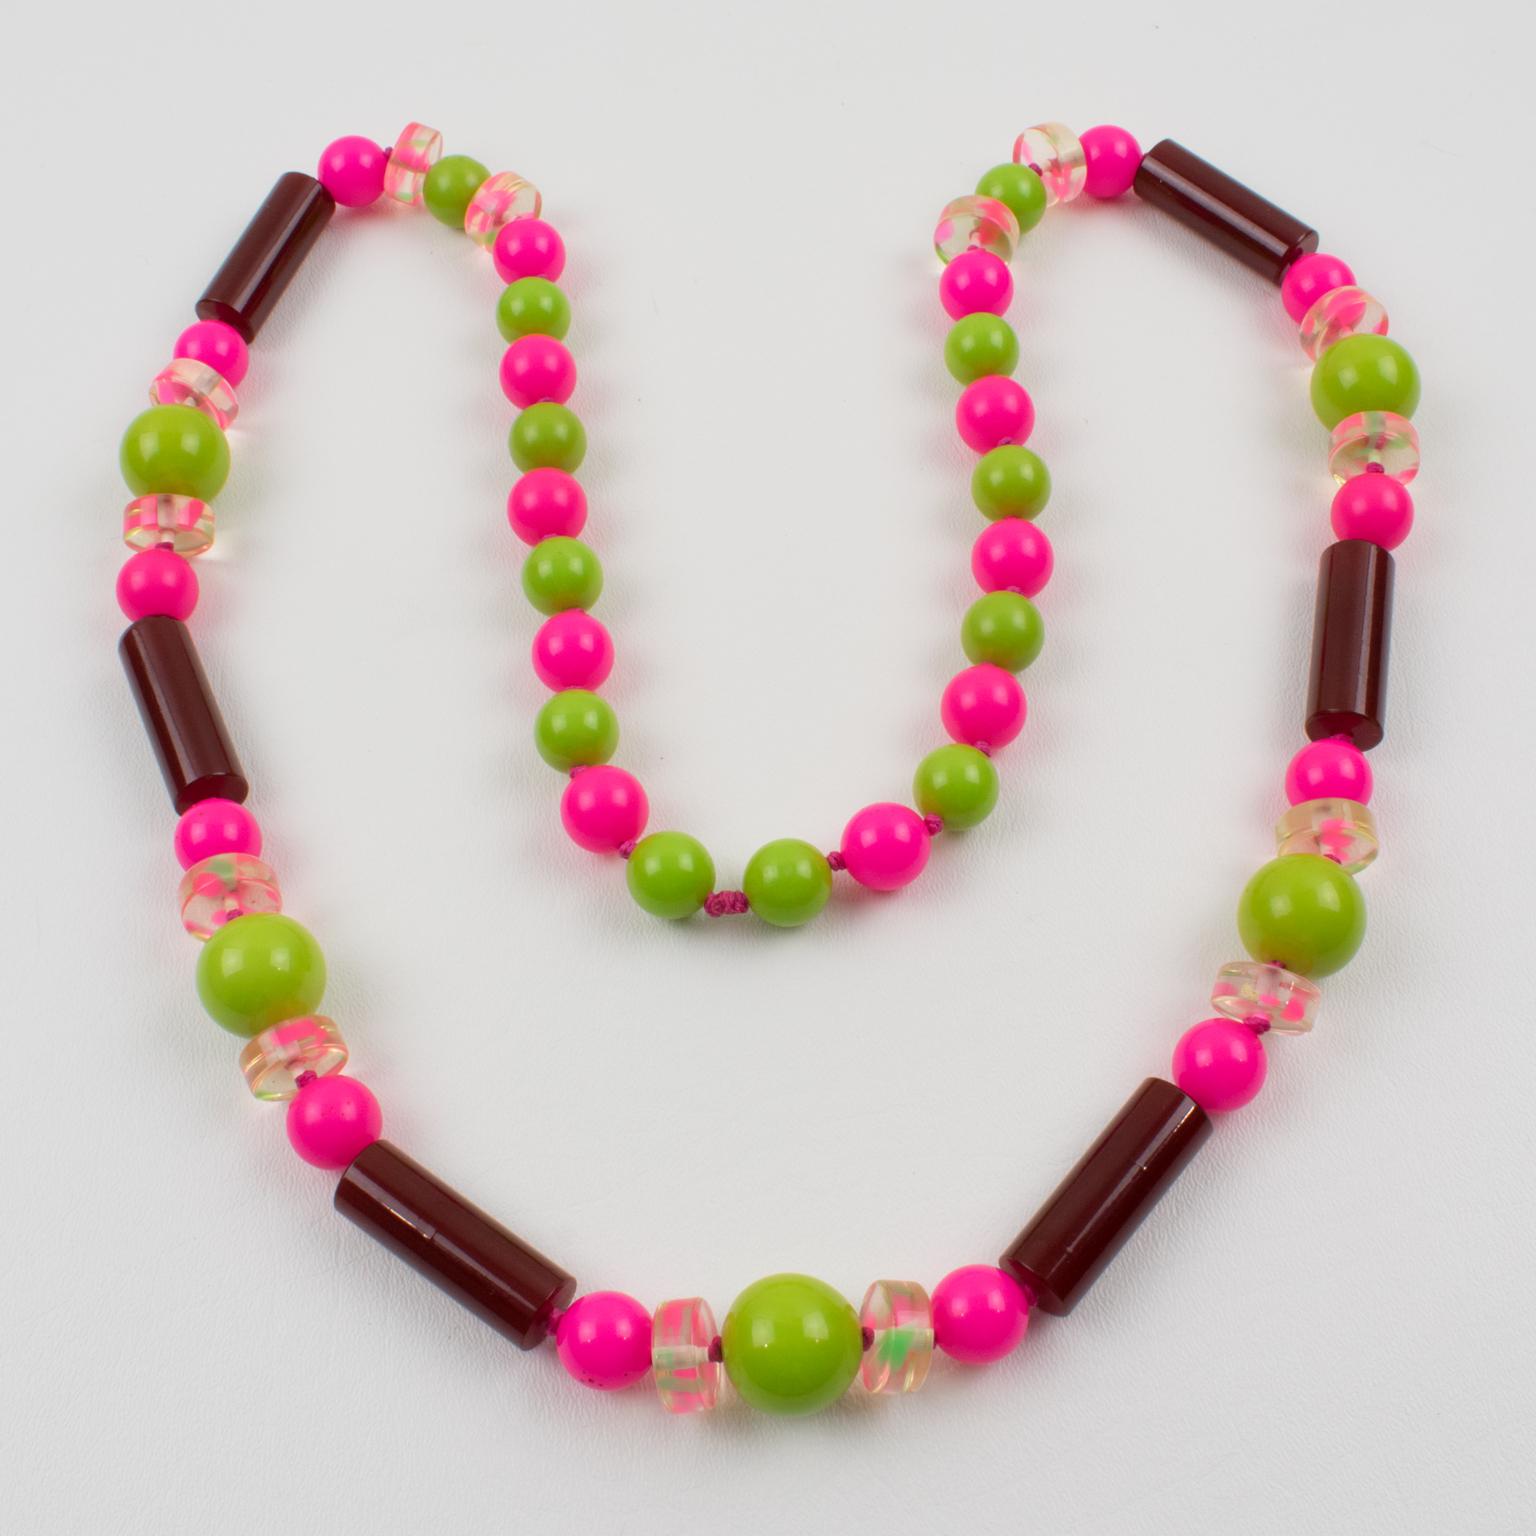 This is a beautiful extra-long Bakelite and Lucite beaded necklace. The piece boasts assorted beads in various shapes: round, long stick, and round disk, some with a pattern. Stunning mix-and-match flashy colors, apple green marble, hot pink, and